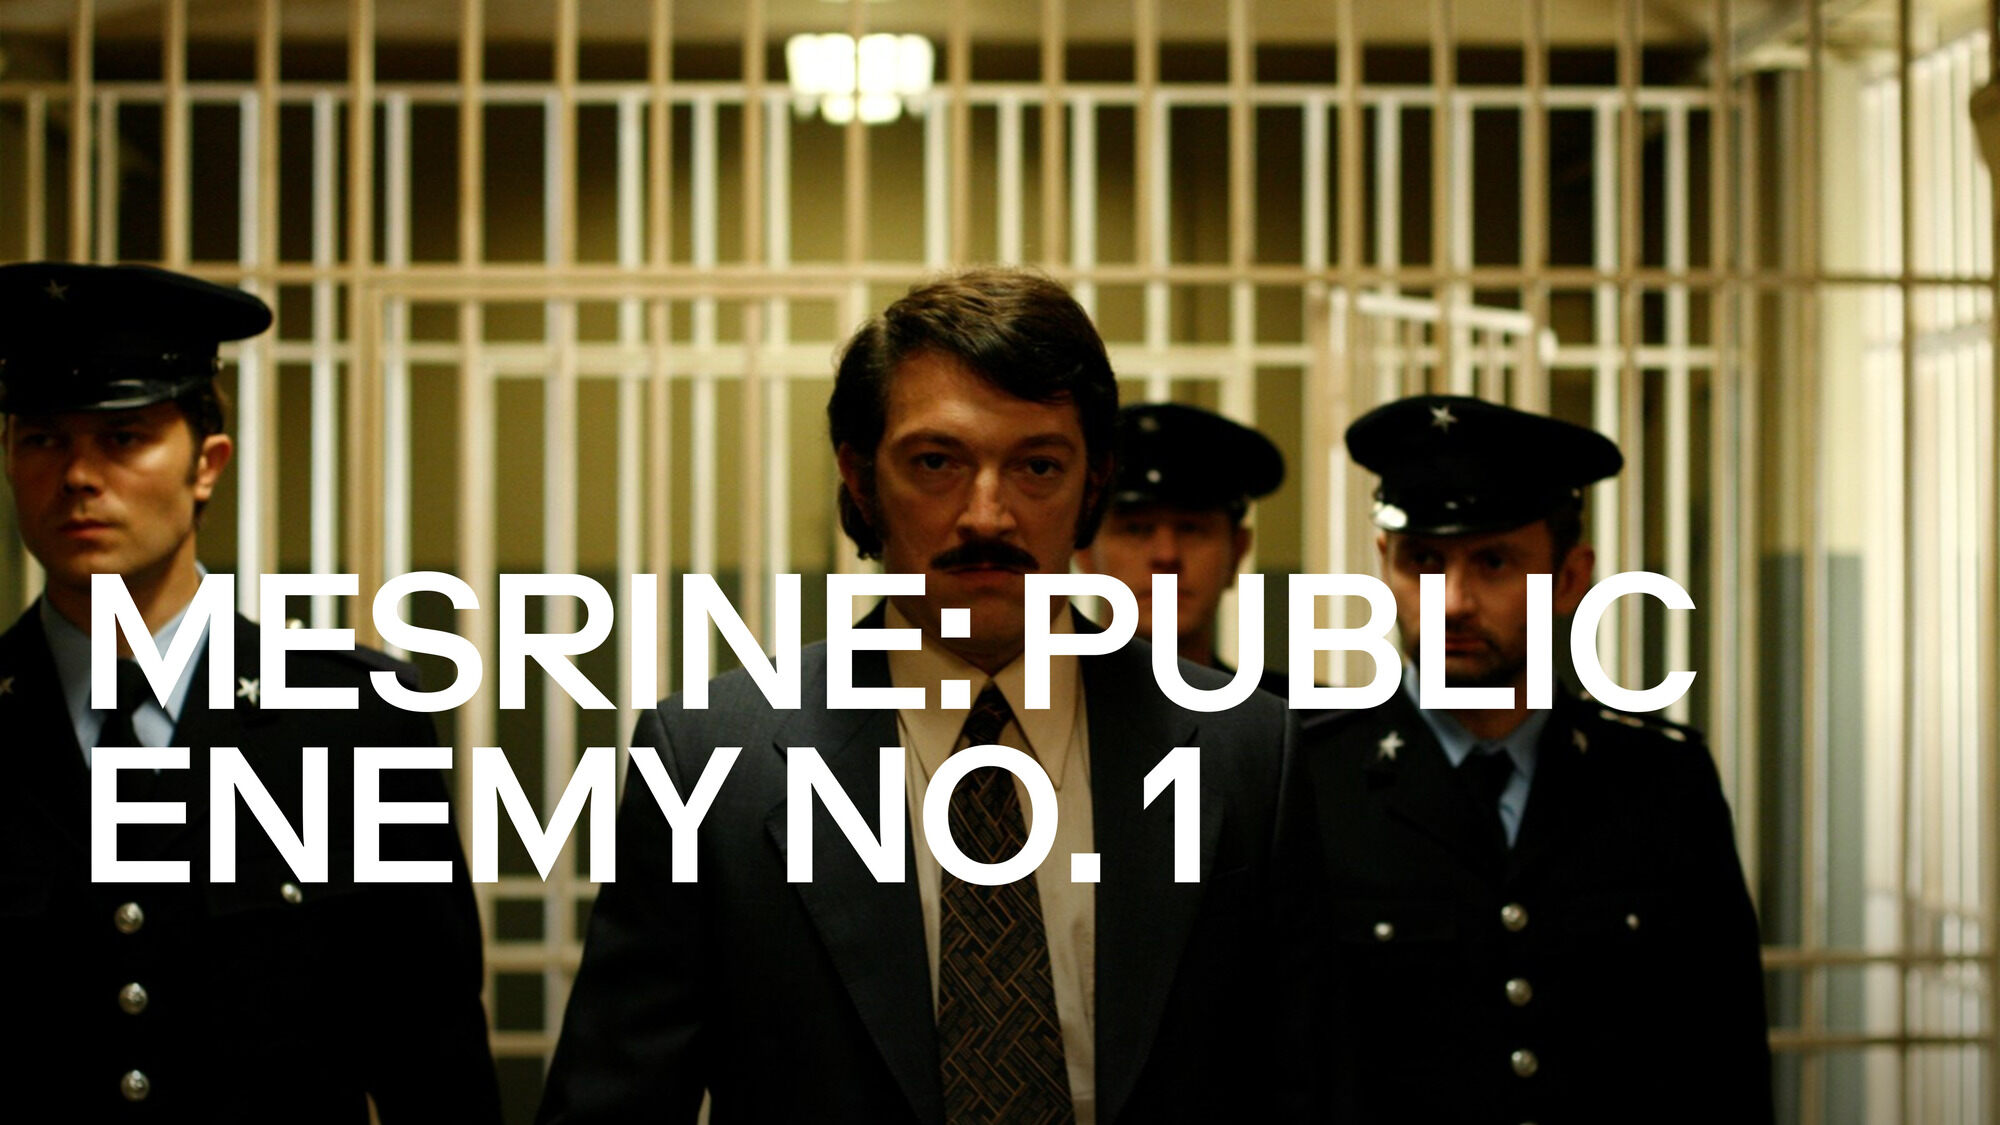 33-facts-about-the-movie-mesrine-public-enemy-no-1